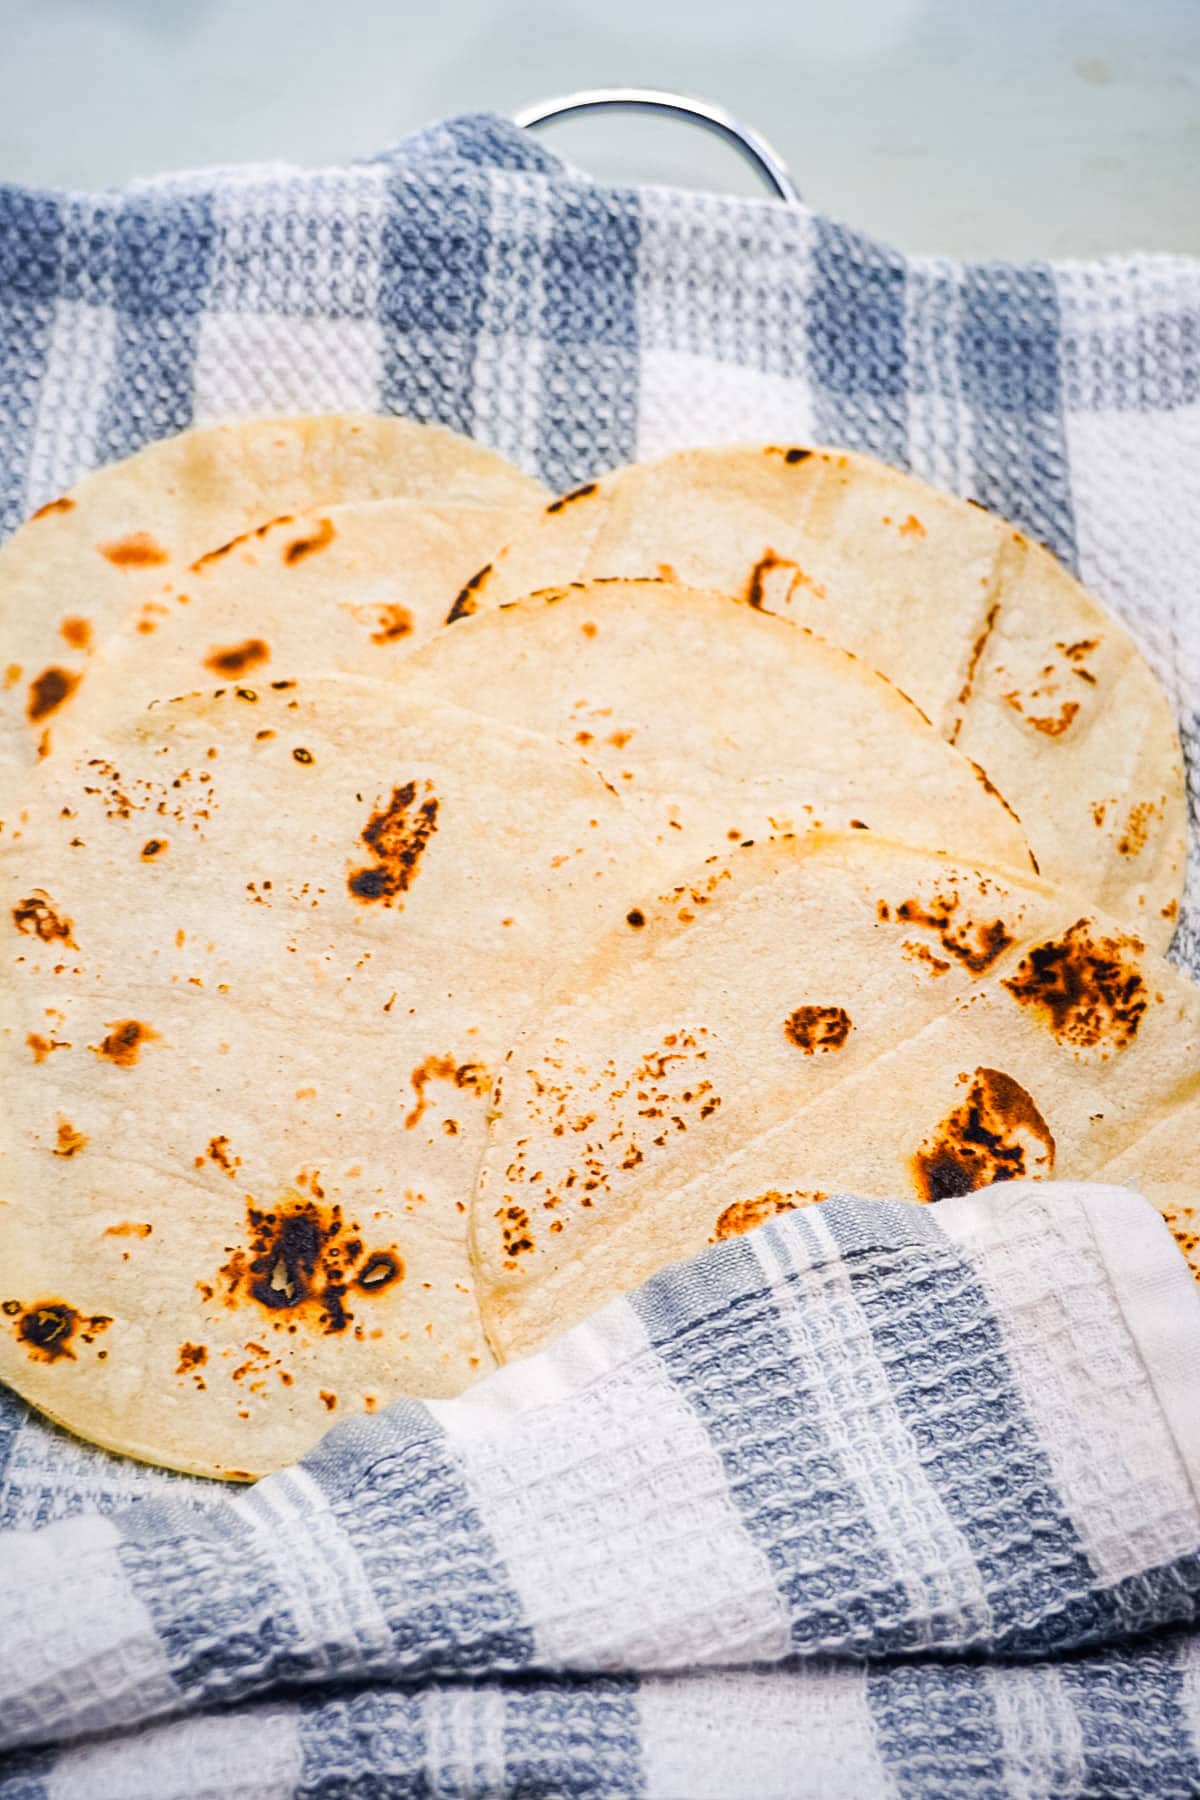 The corn tortillas needed for this recipe.